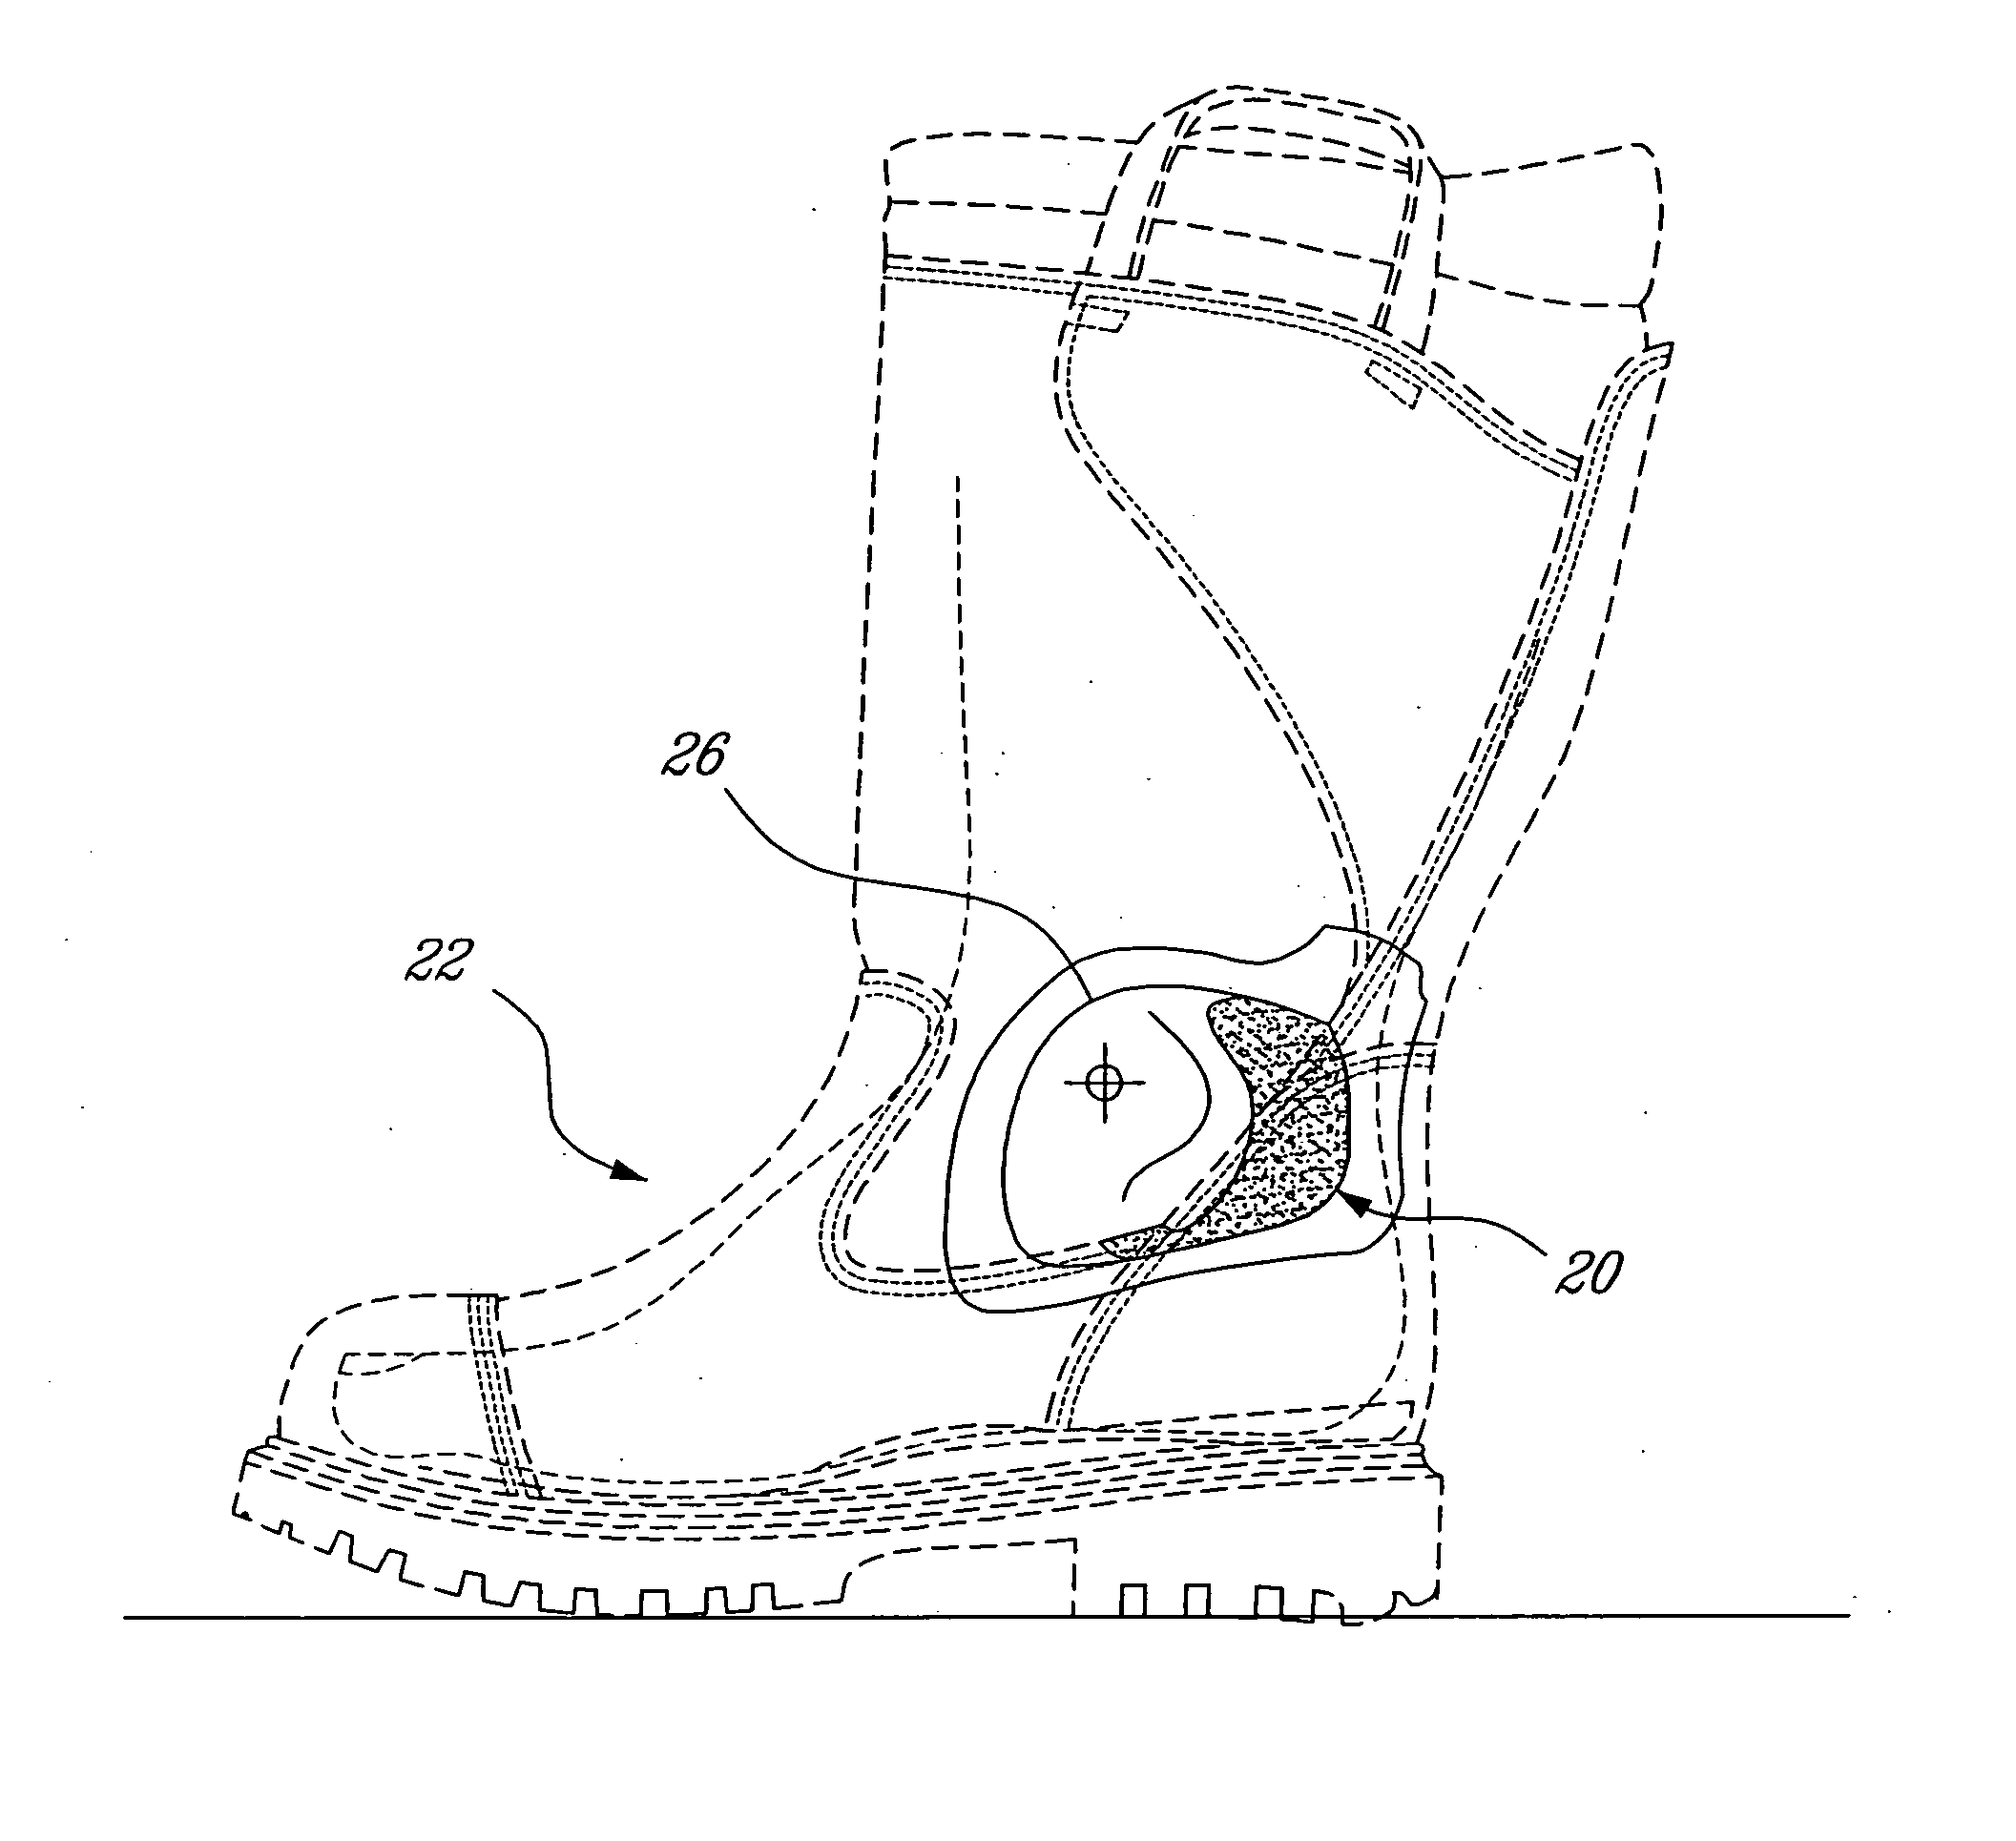 Ankle support designed to maintain proper integral boot fit